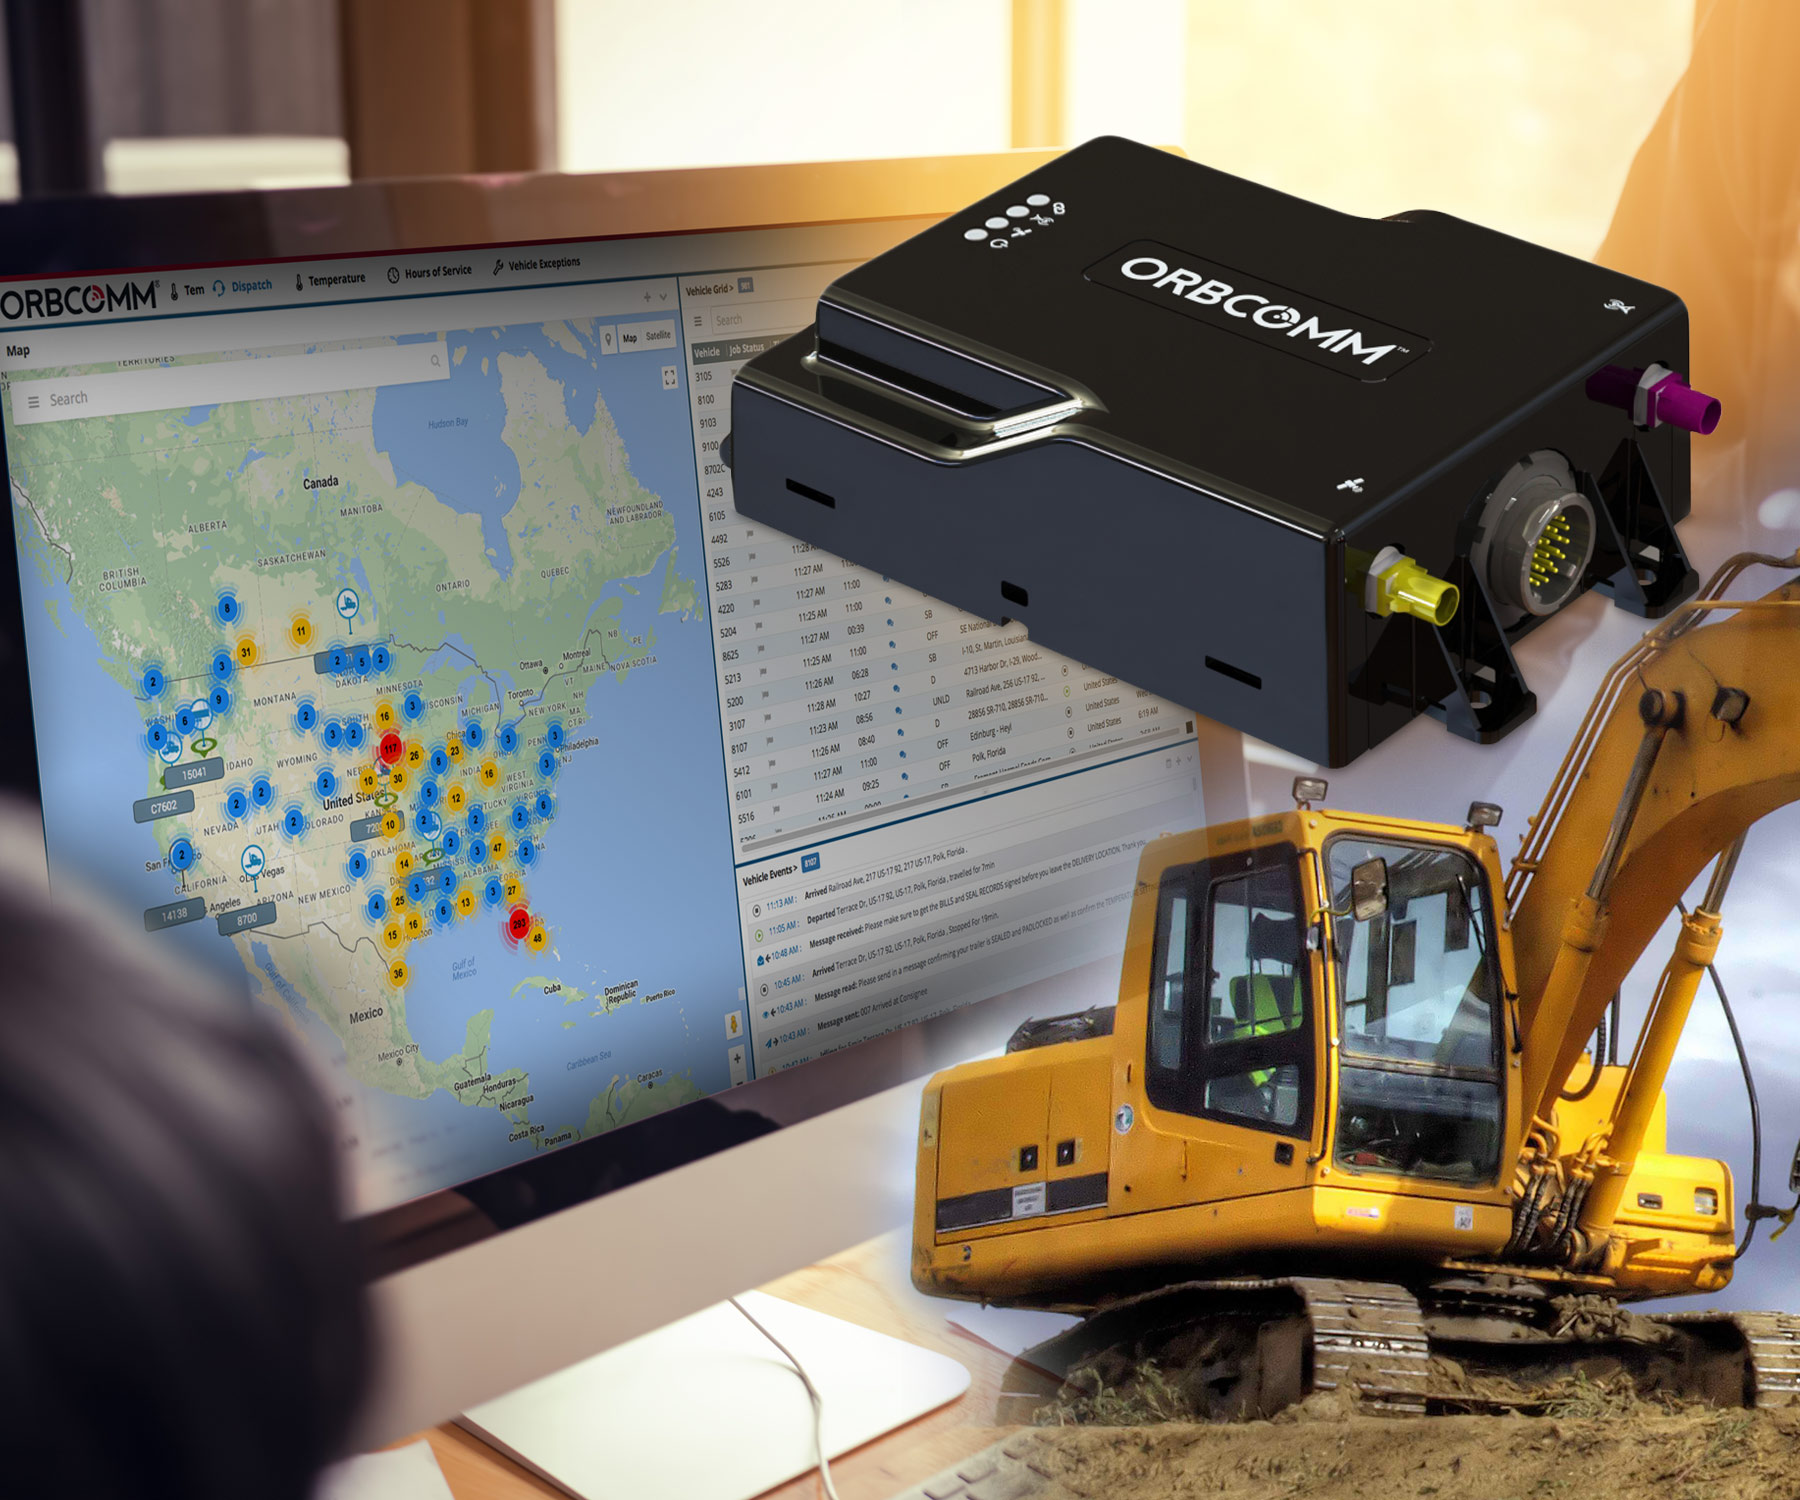 Orbcomm telematics device and online platform